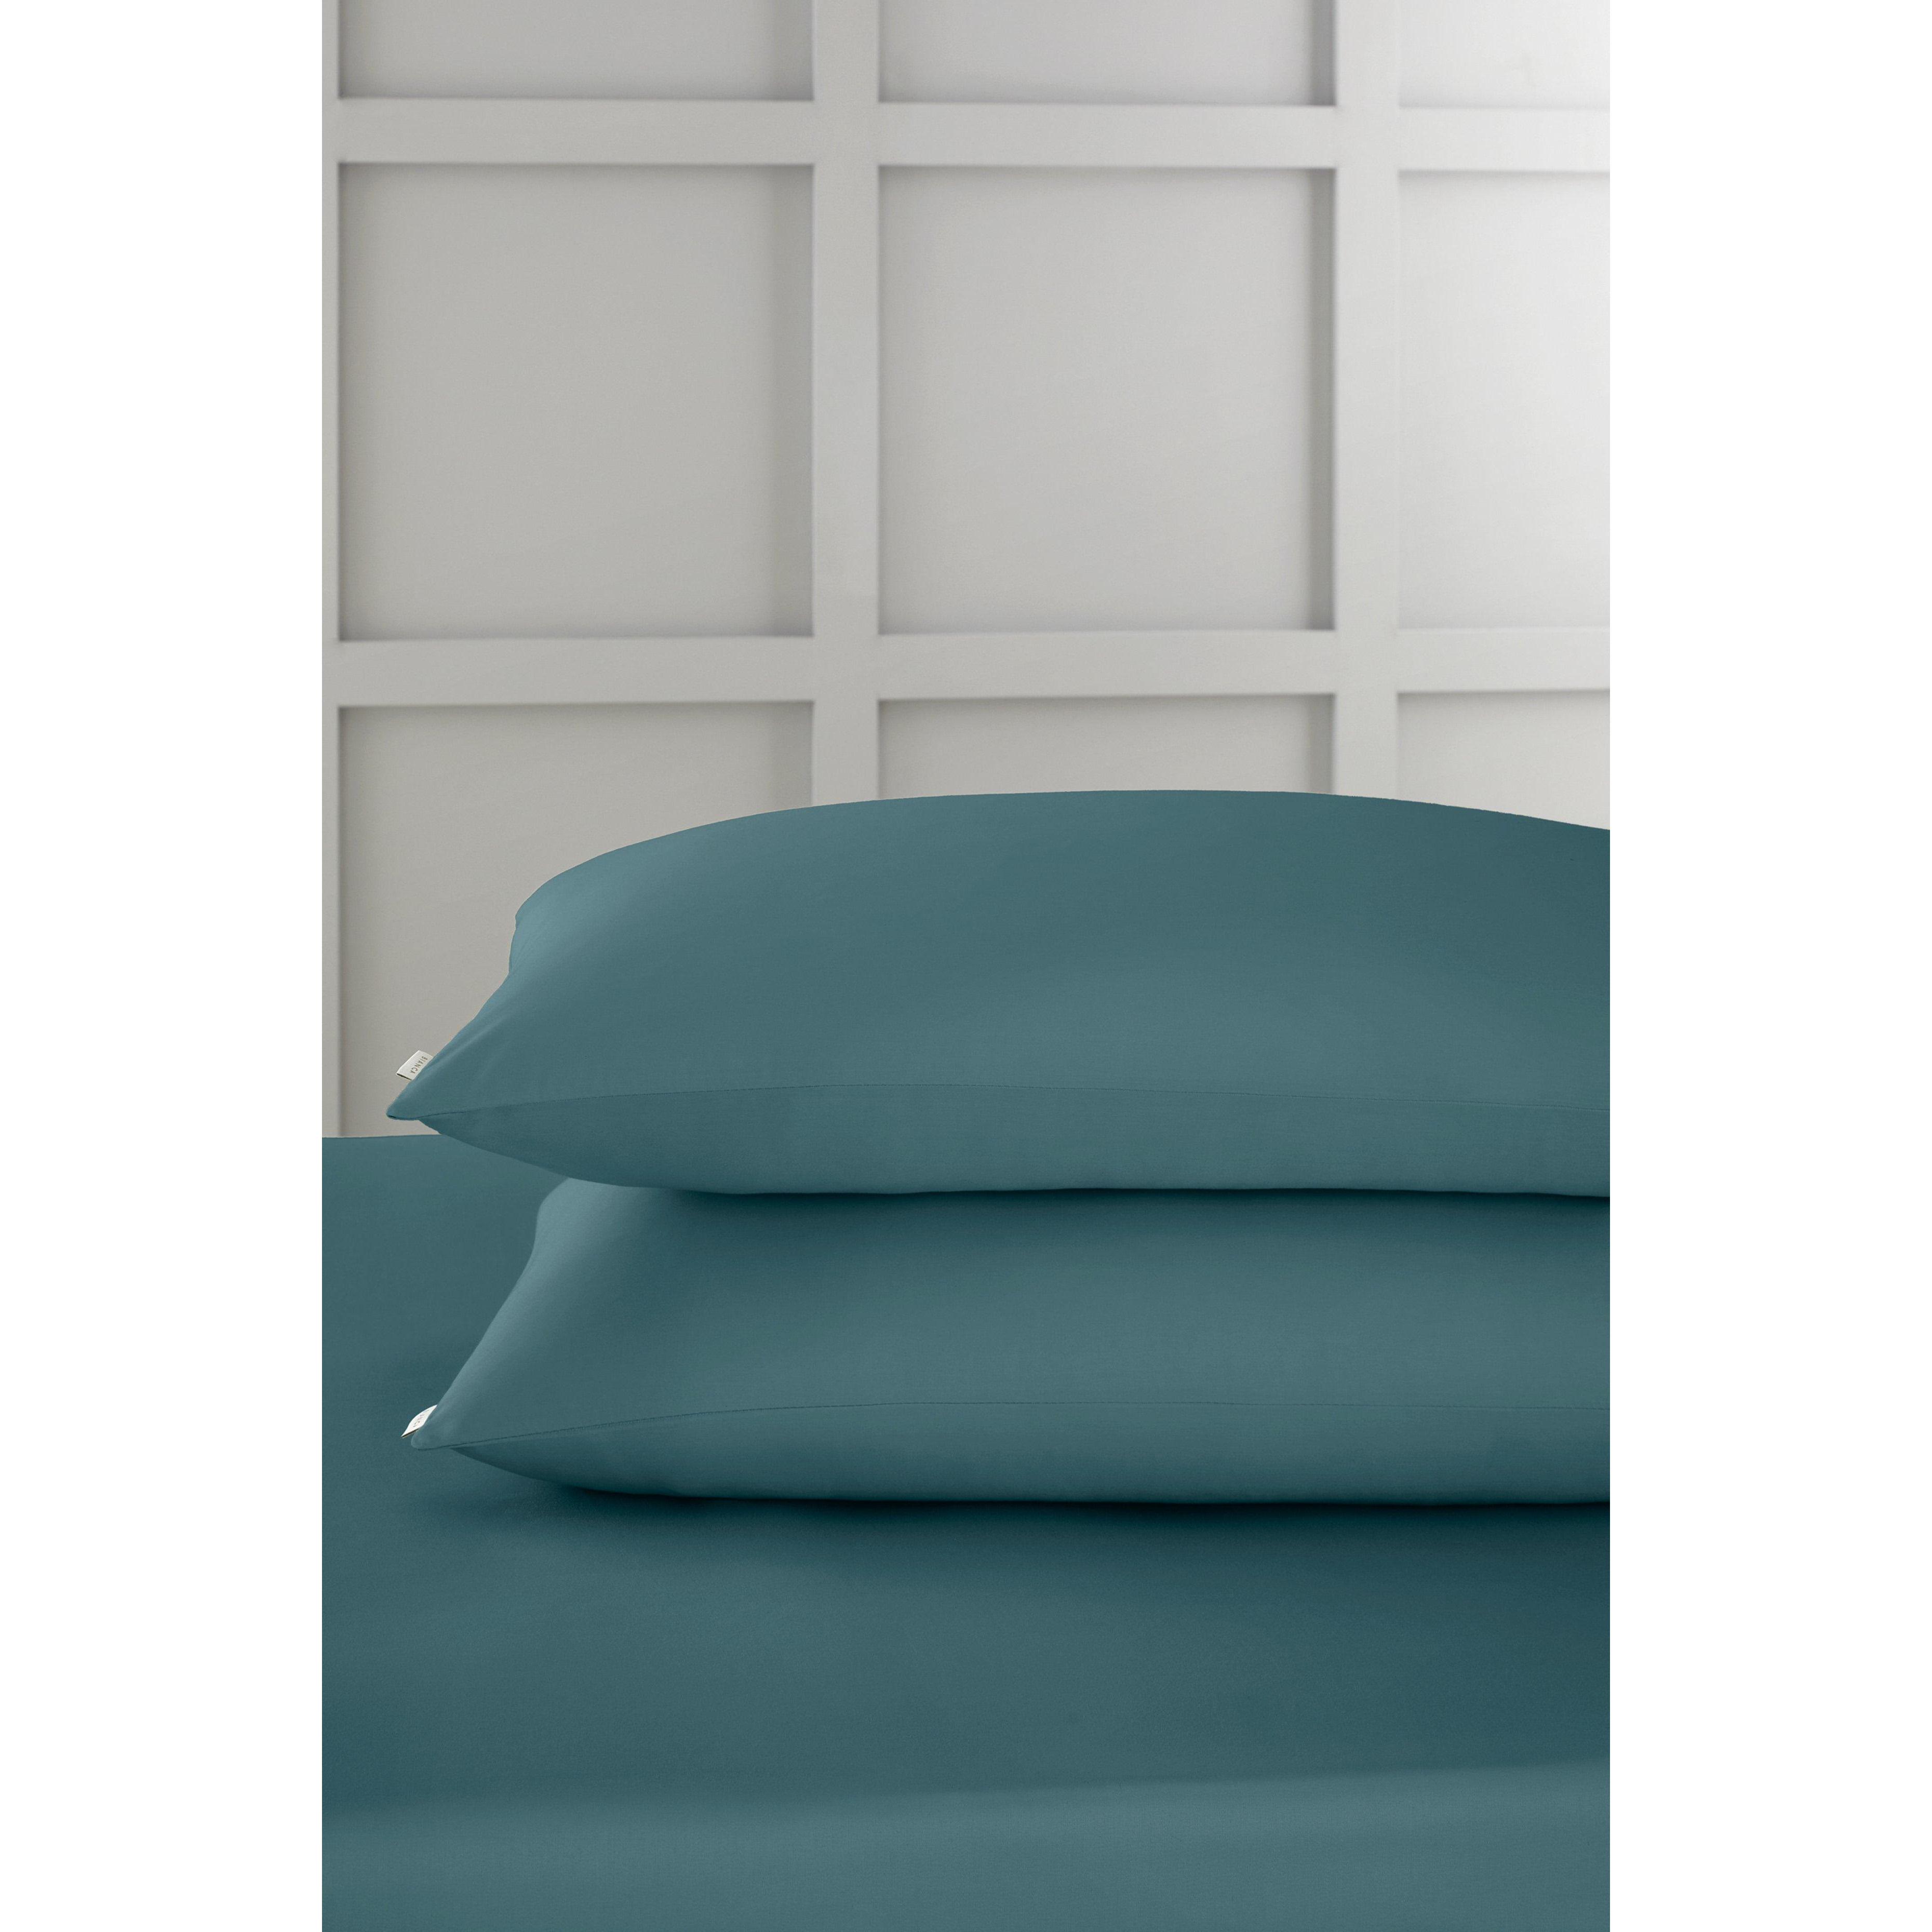 '400 Thread Count Cotton Sateen' Standard Pillowcases - image 1